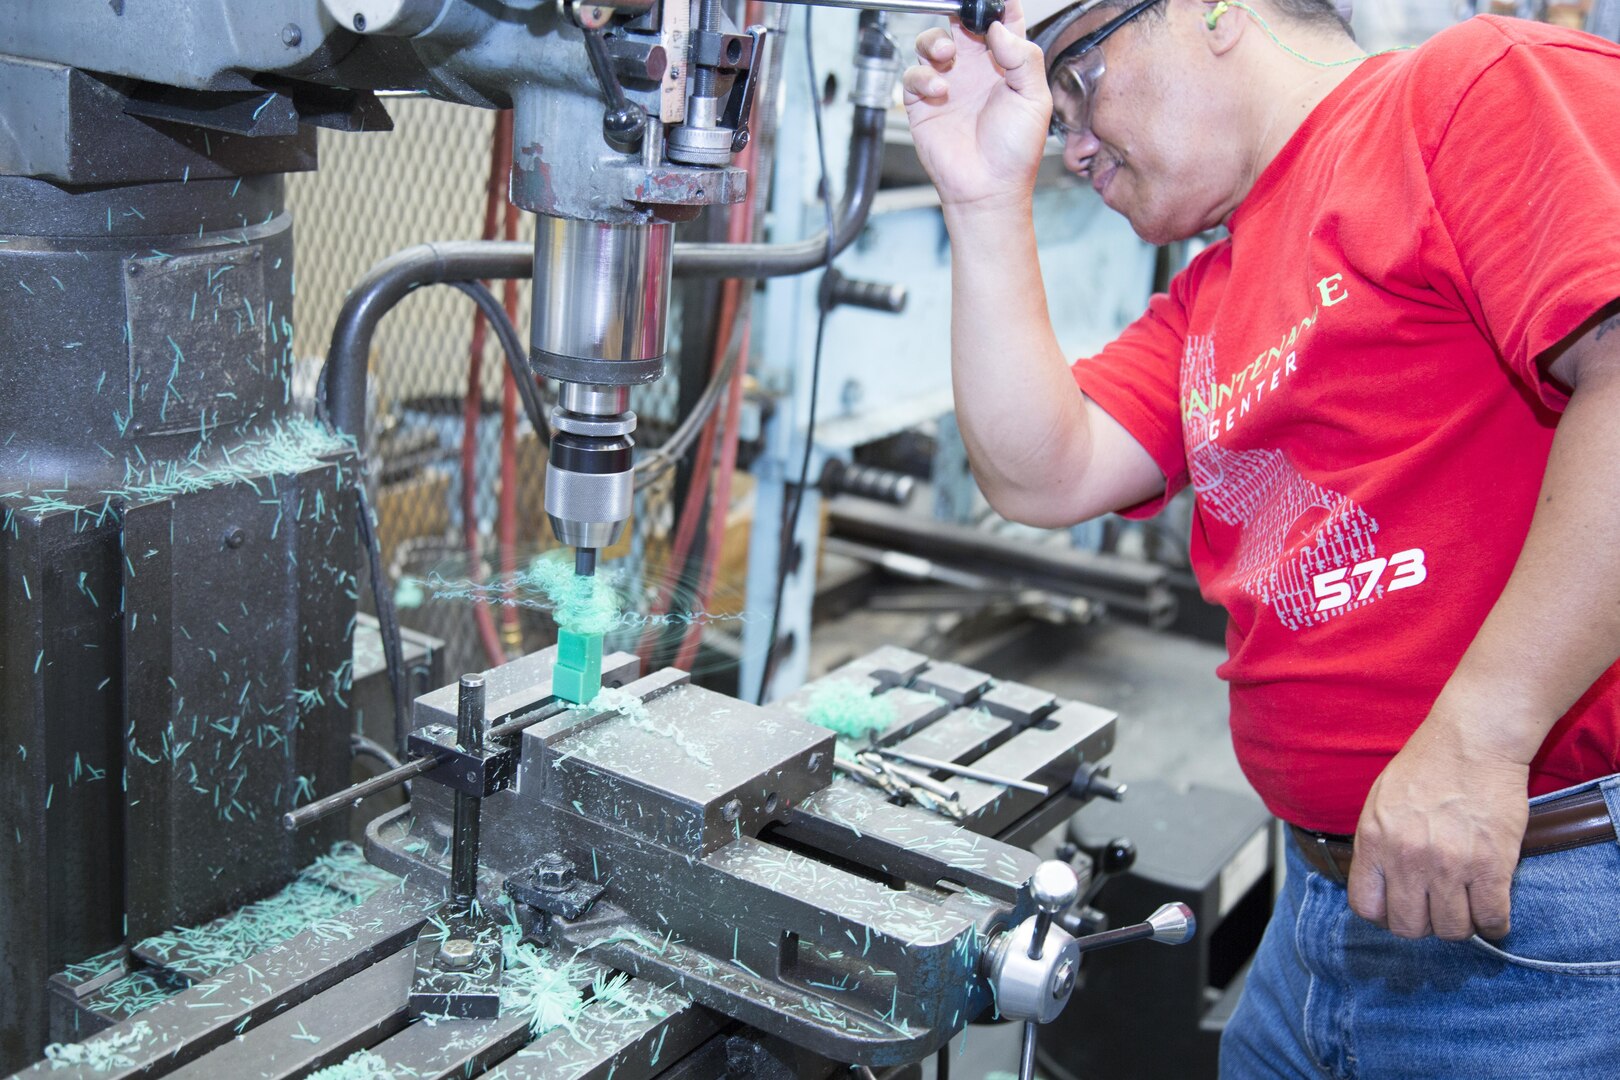 Wilfredo Dizon brings his more than 30 years experience as a machinist both in the Navy and civilian life to Production Plant Barstow. Here he is boring out a hole in a plastic part using a vertical milling machine, Aug. 2. Dizon said working on plastic is harder than working on metal at the Marine Depot Maintenance Command facility board the Yermo Annex of Marine Corps Logistics Base Barstow, Calif.